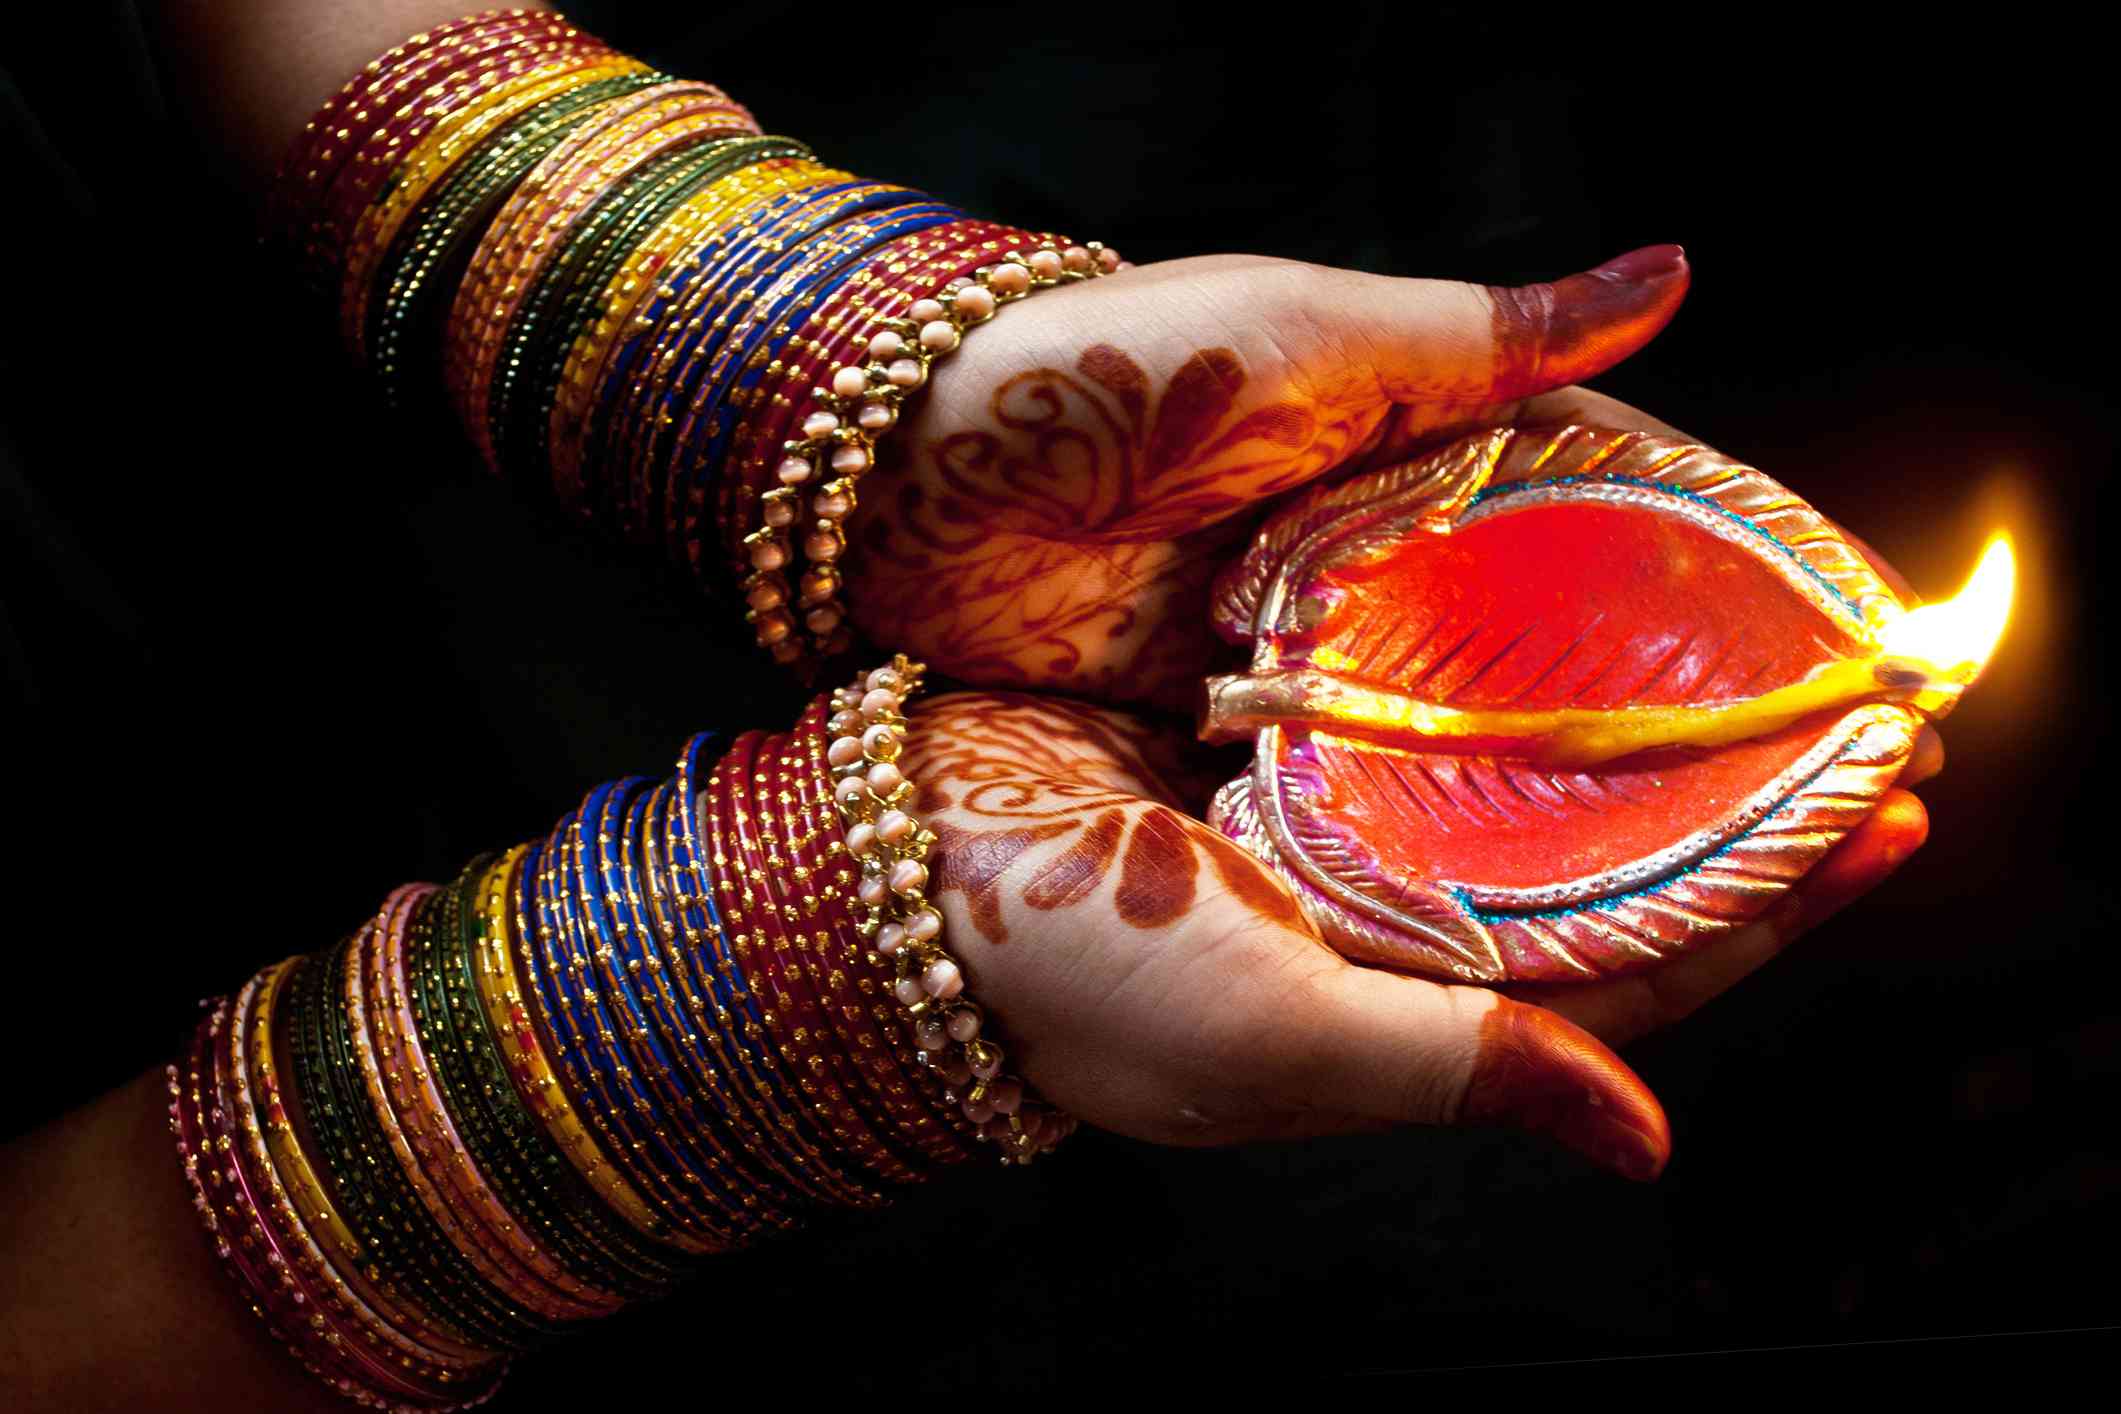 Ideas to get perfect photos this Diwali. Pose for girls and boys and couples